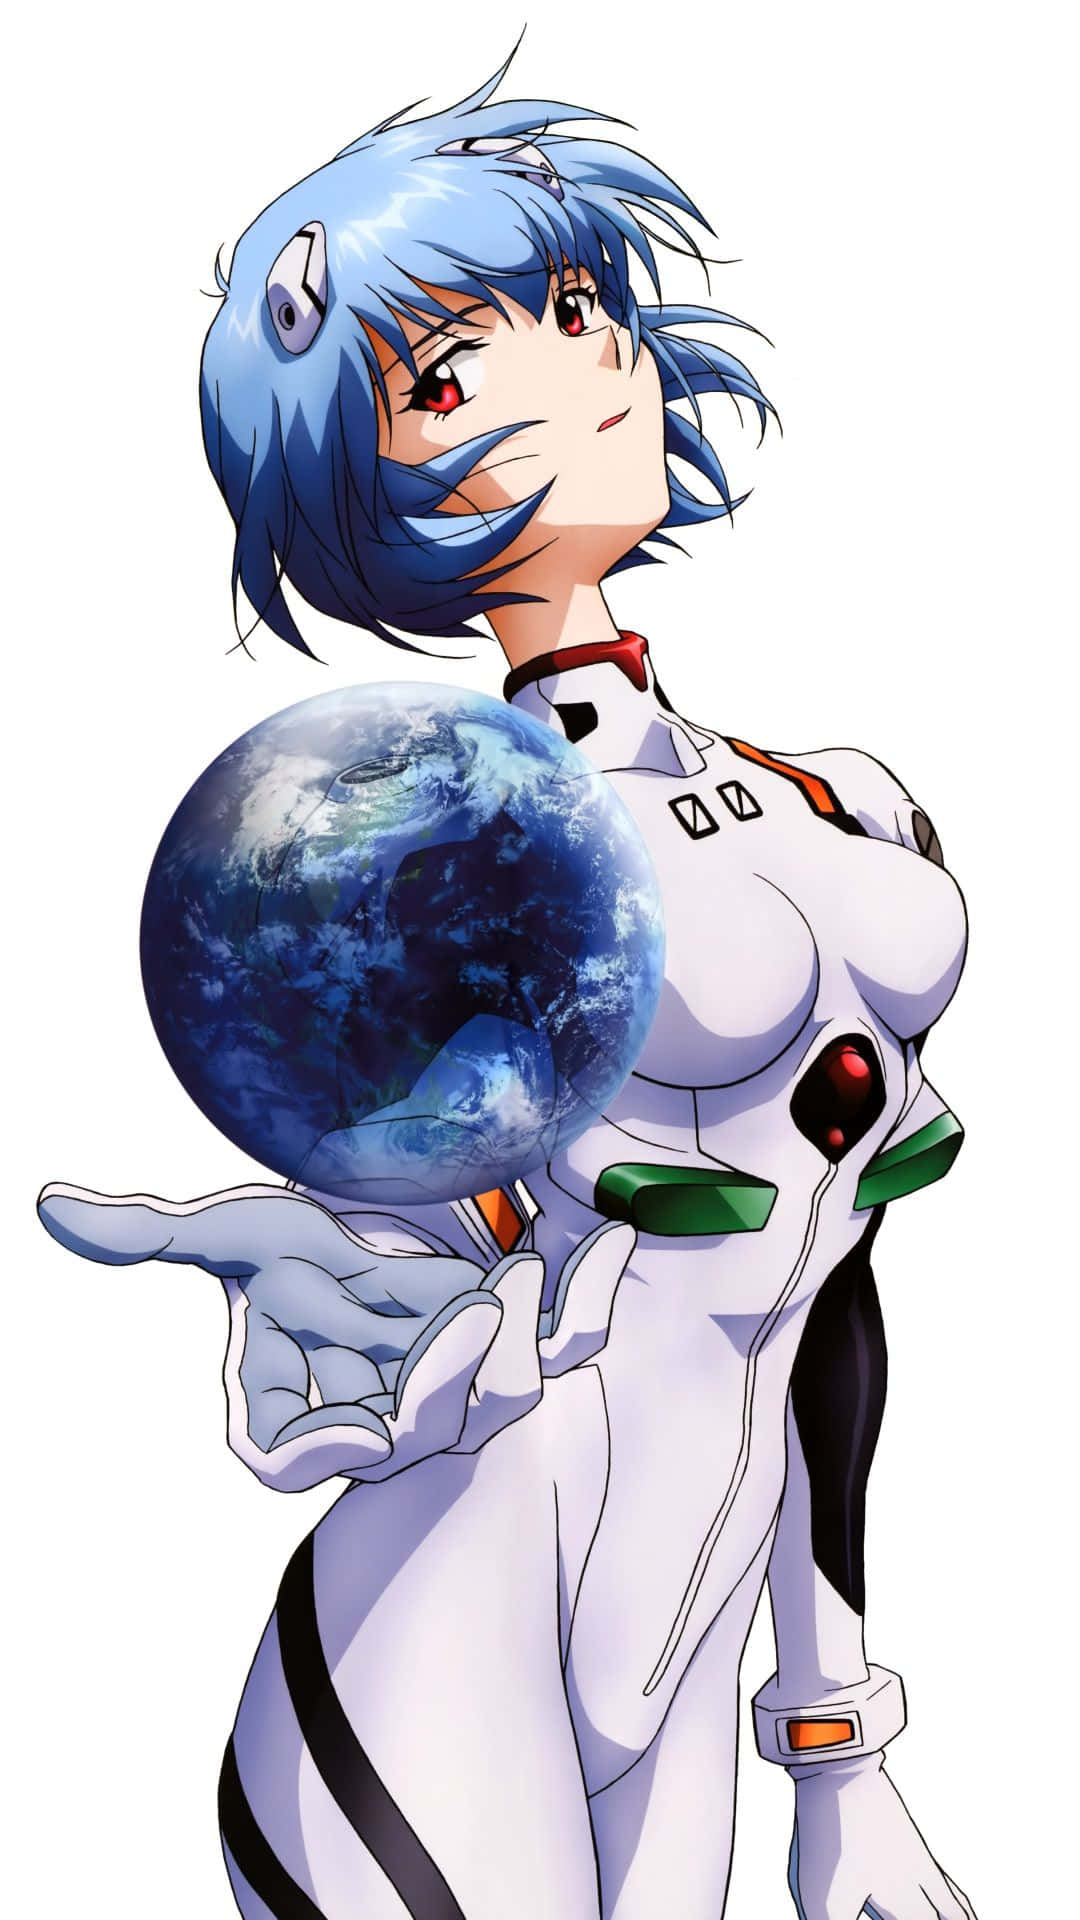 Rei Ayanami in deep thought Wallpaper